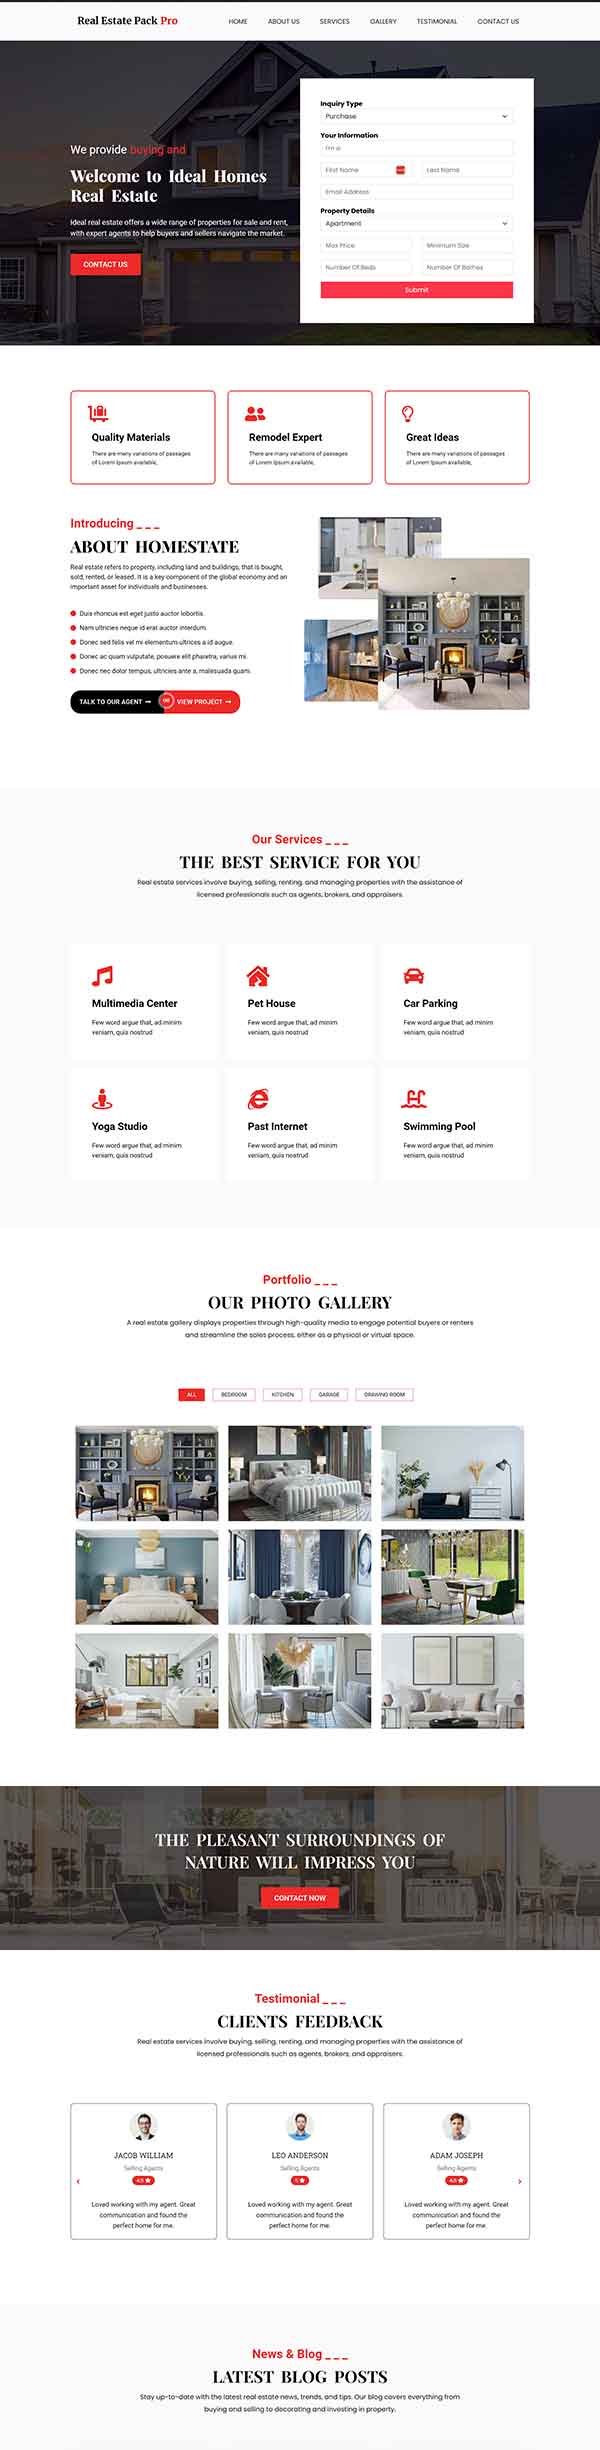 Real Estate Pack Pro WordPress theme one page home demo